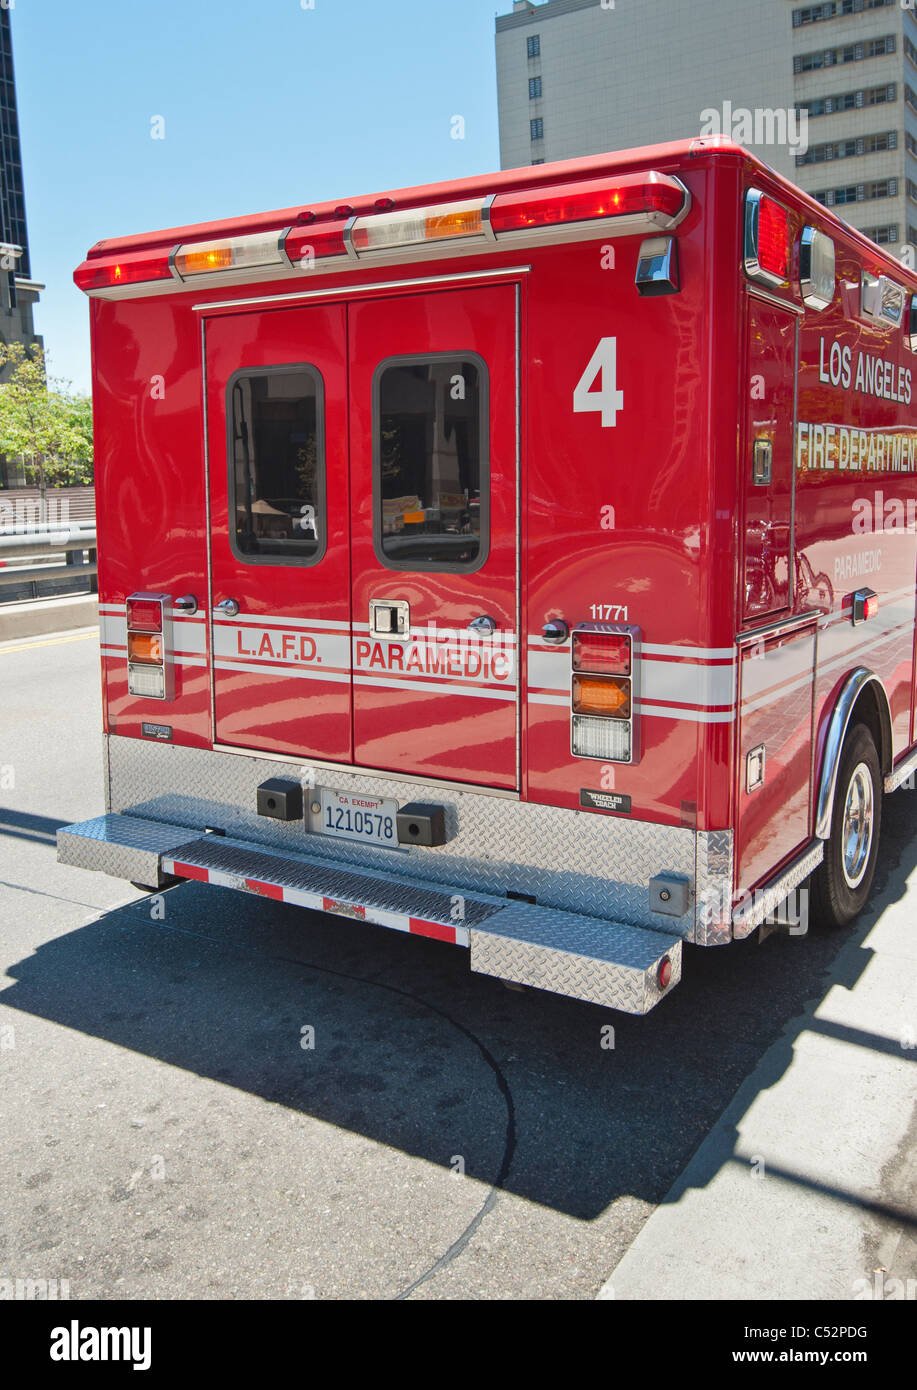 Los Angeles Fire Department Paramedic responding to a call in the financial district of Downtown Los Angeles. Stock Photo